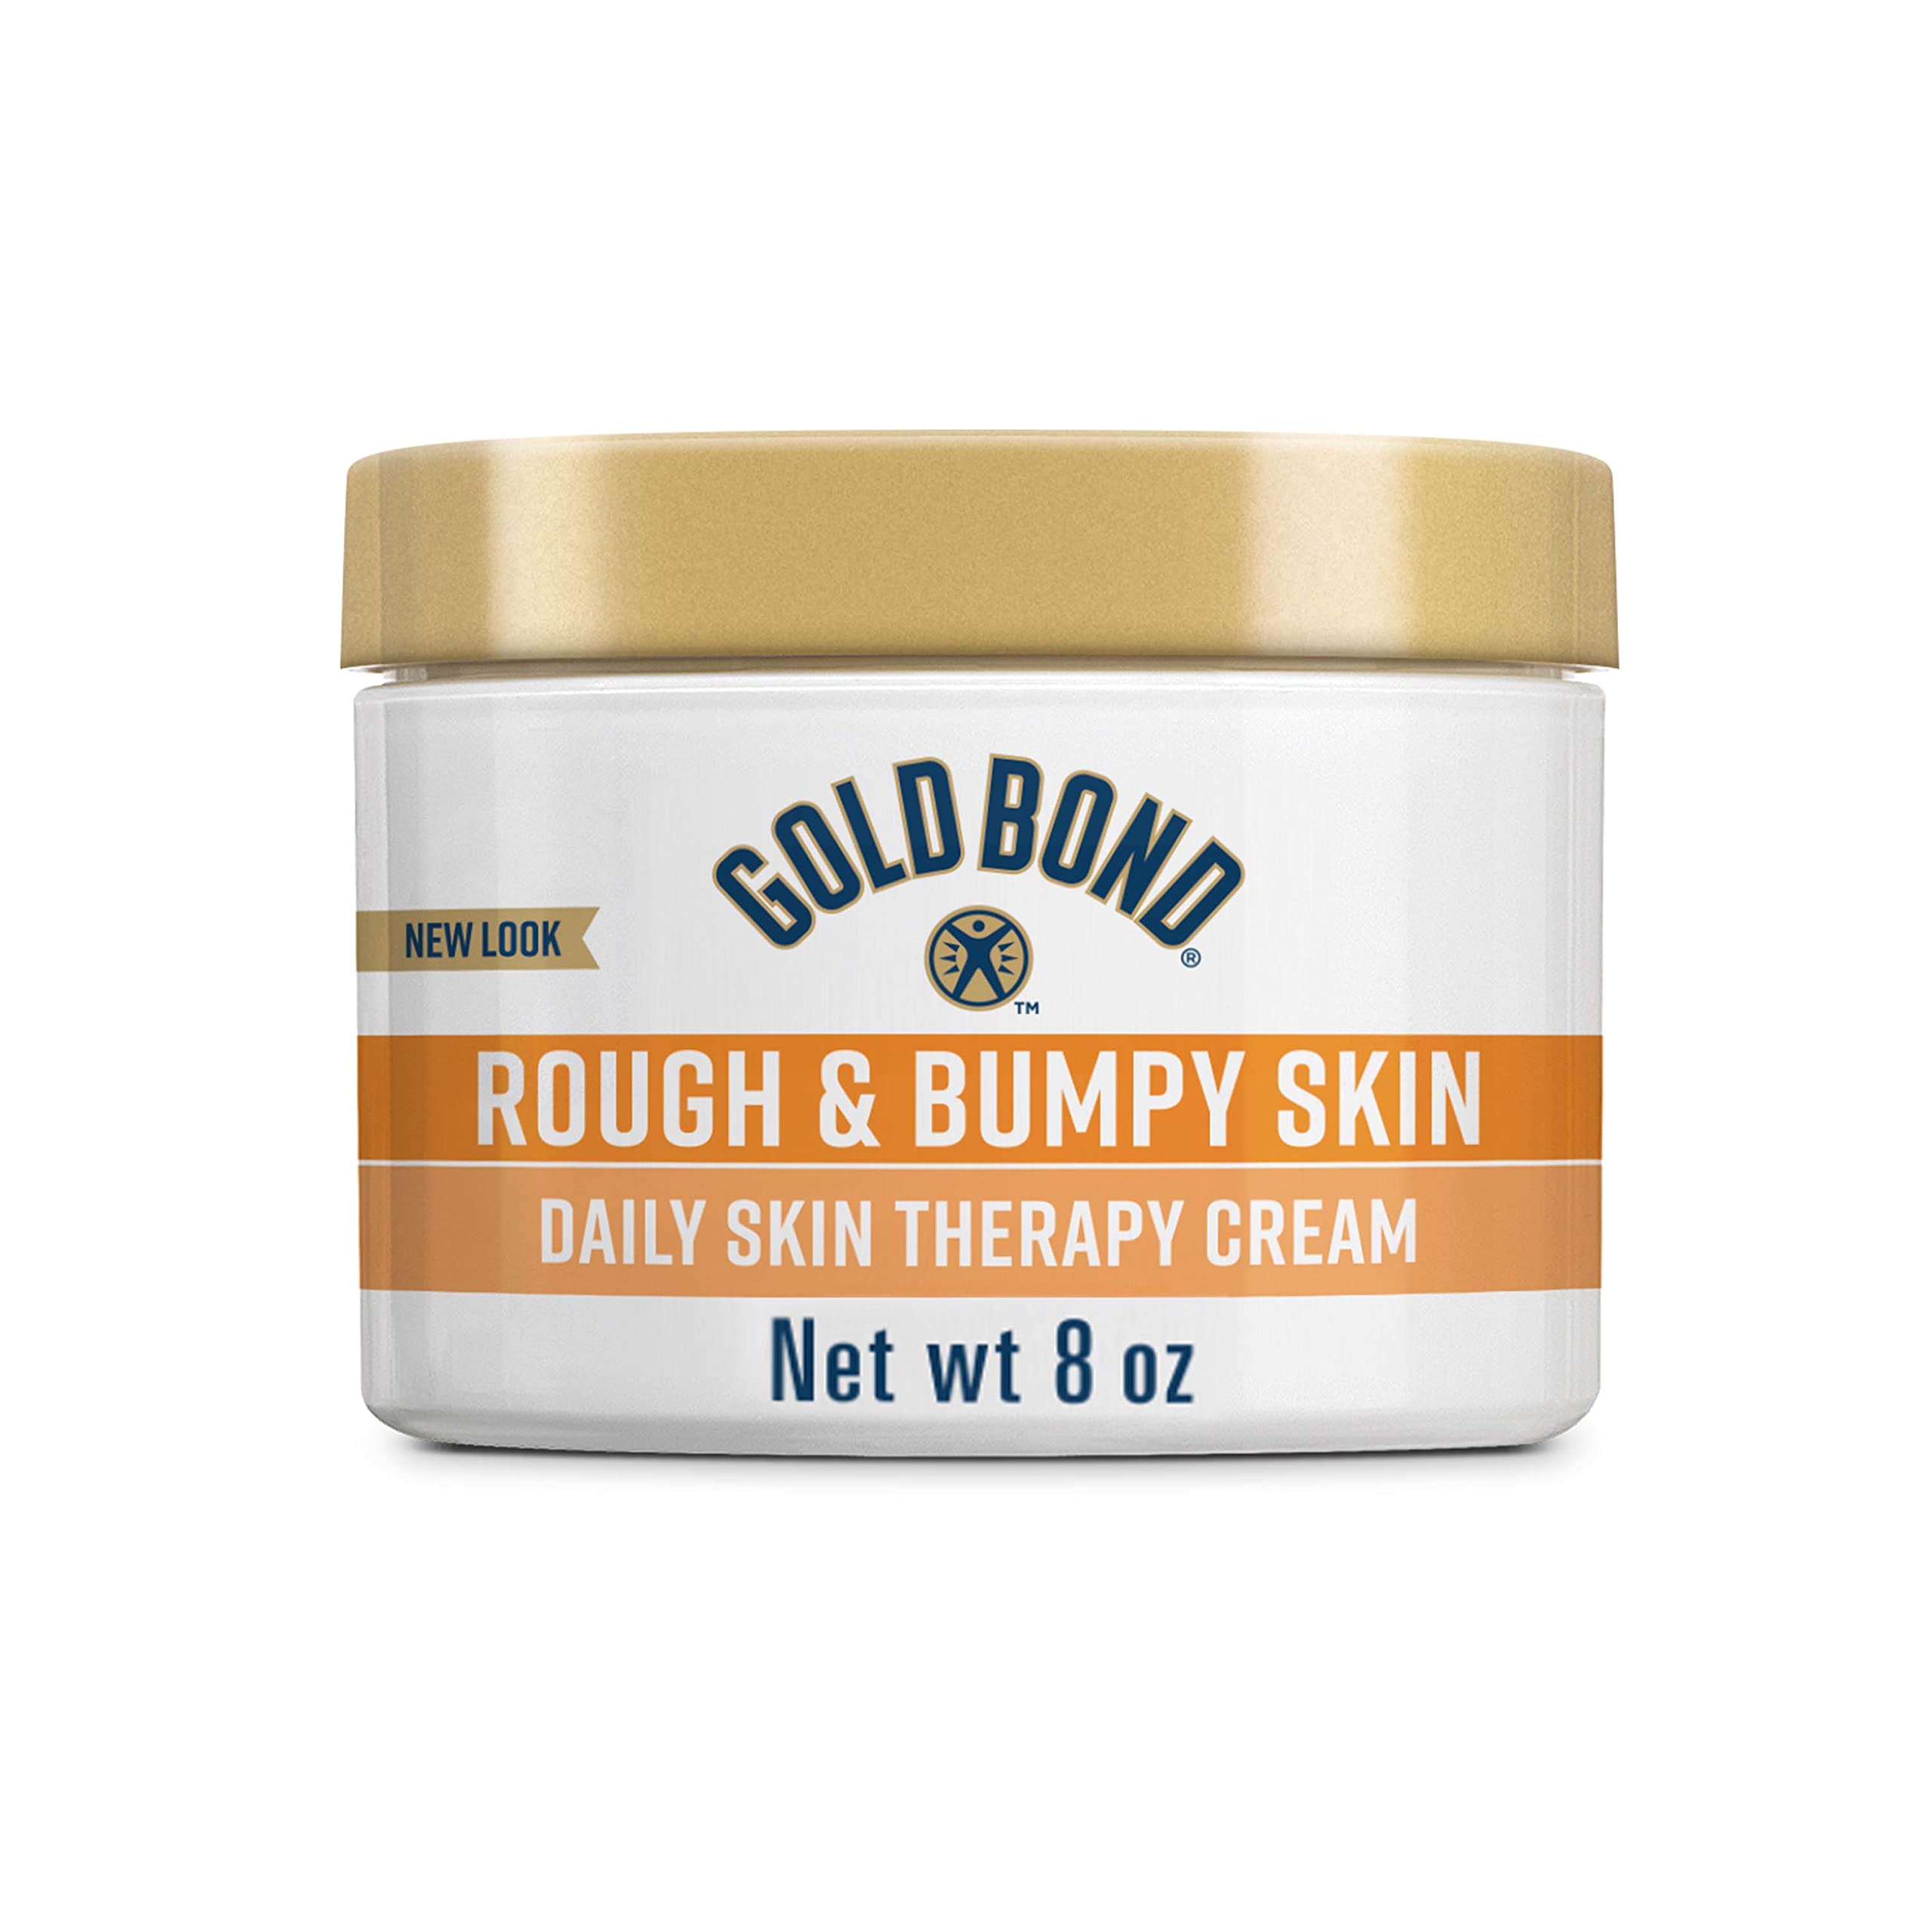 Gold Bond Ultimate Rough & Bumpy Daily Skin Therapy, 8 Ounce, Helps Exfoliate and Moisturize to Smooth, Soften, and Reduce The Appearance and Feel of Bumps and Rough Skin Patches (Packaging May Vary)